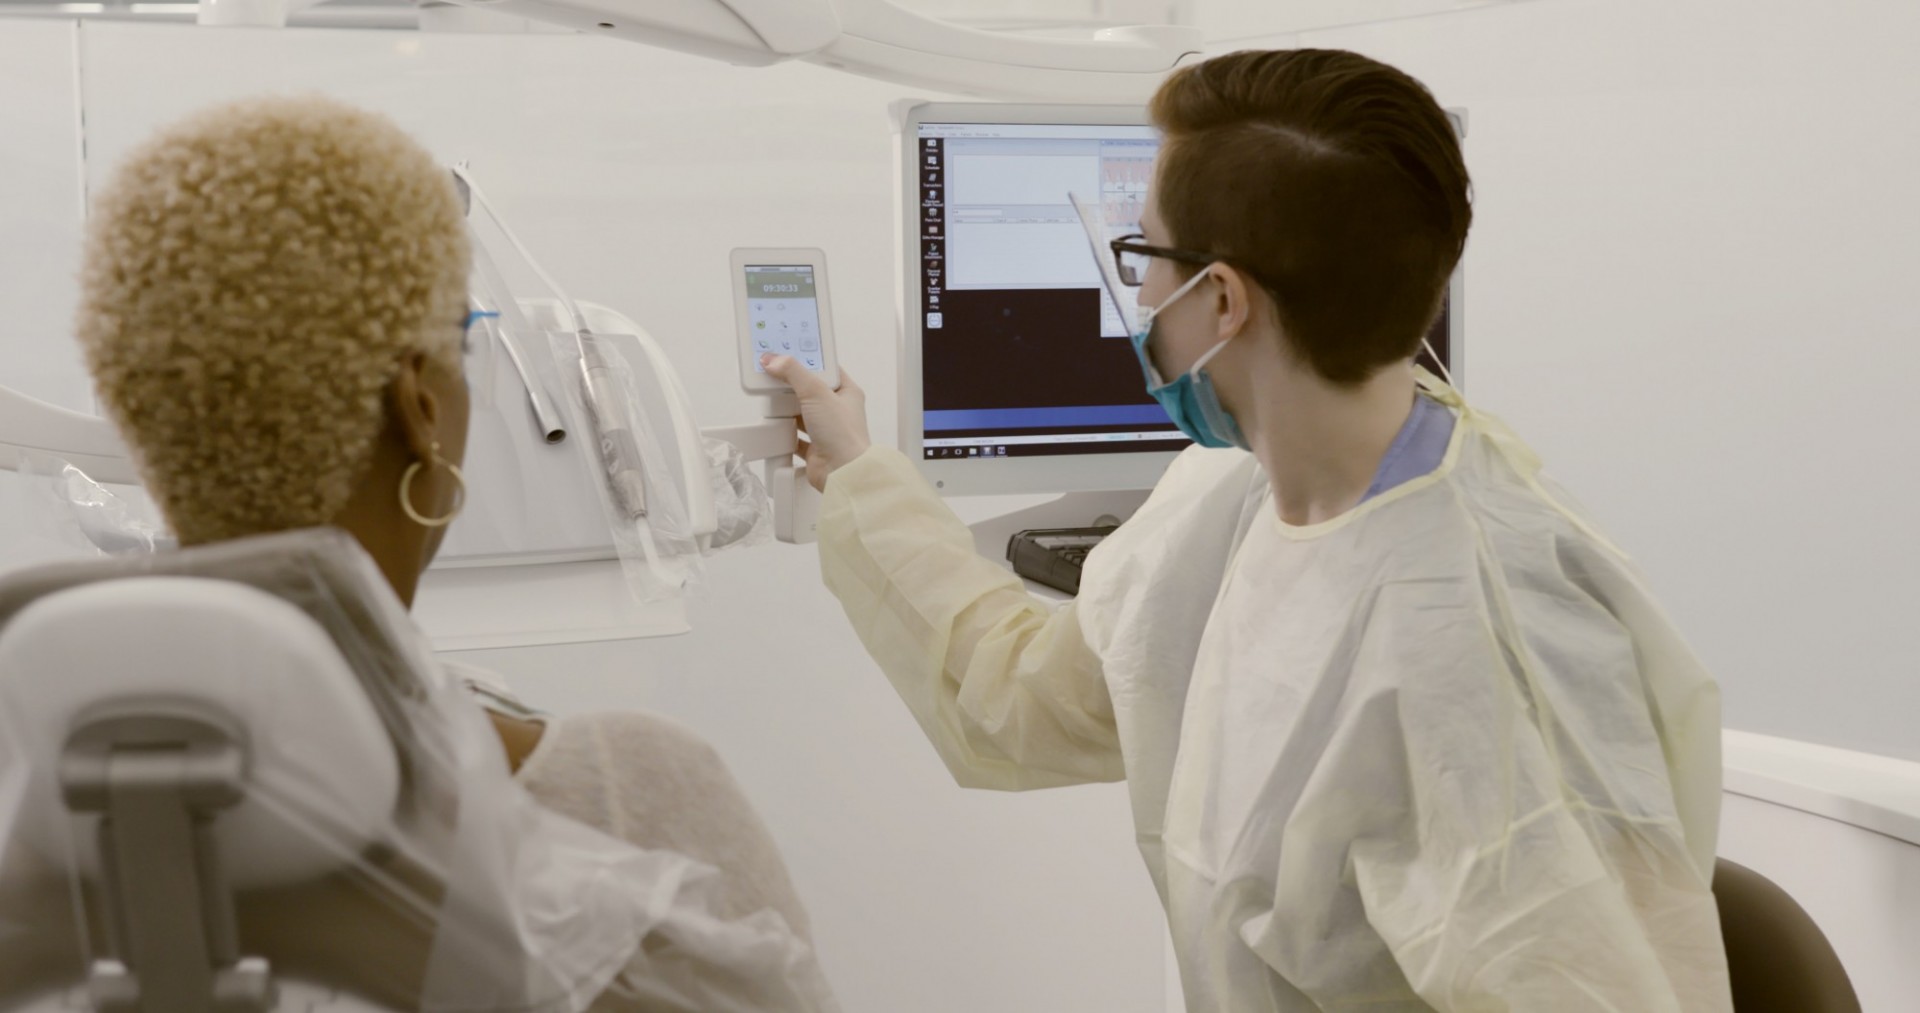 A dentist shows a screen to a patient